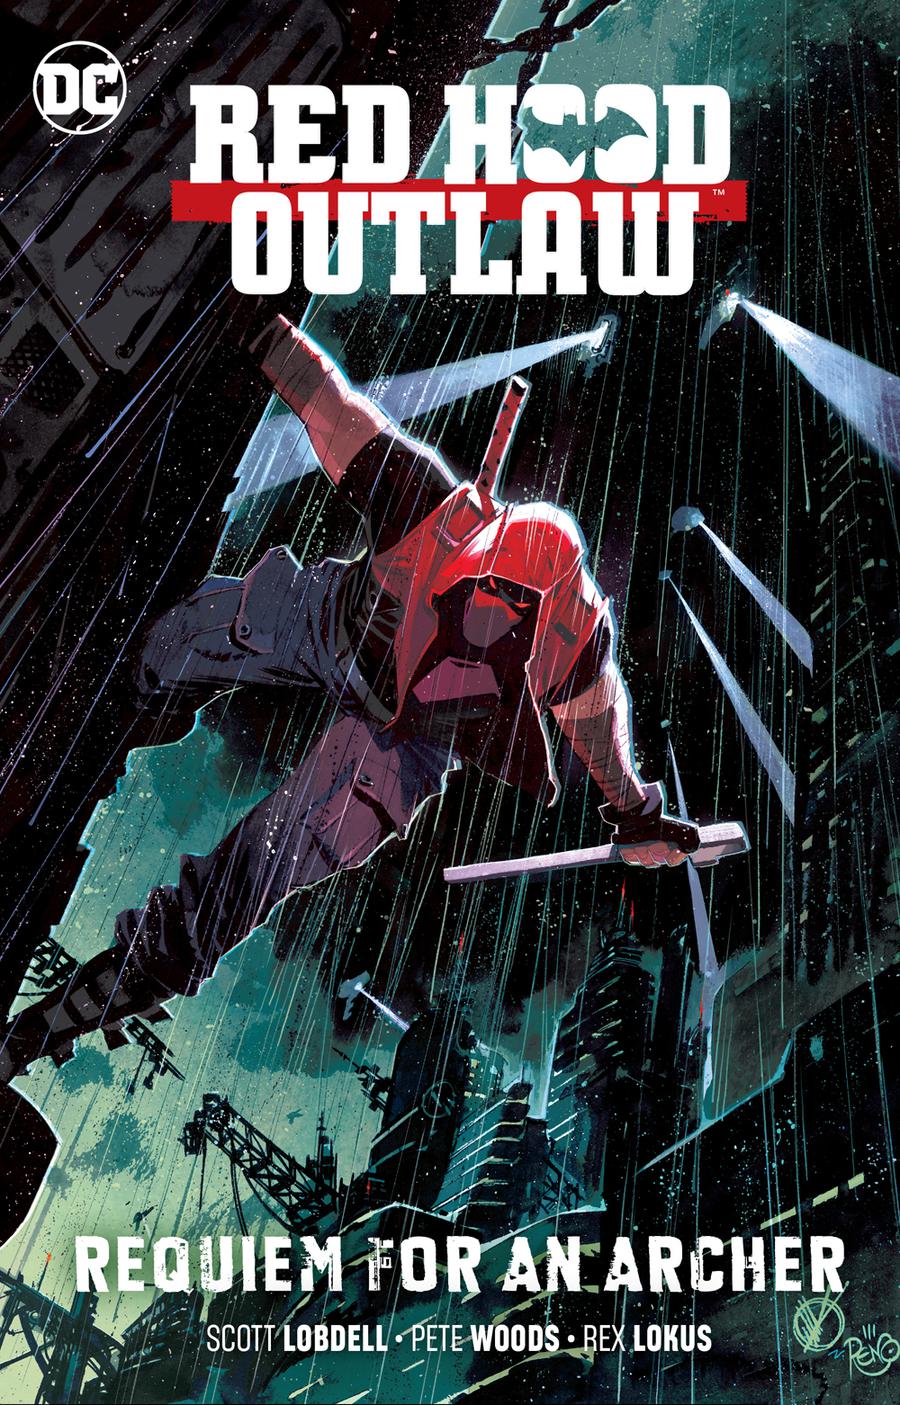 Red Hood Outlaw Vol 1 Requiem For An Archer TP